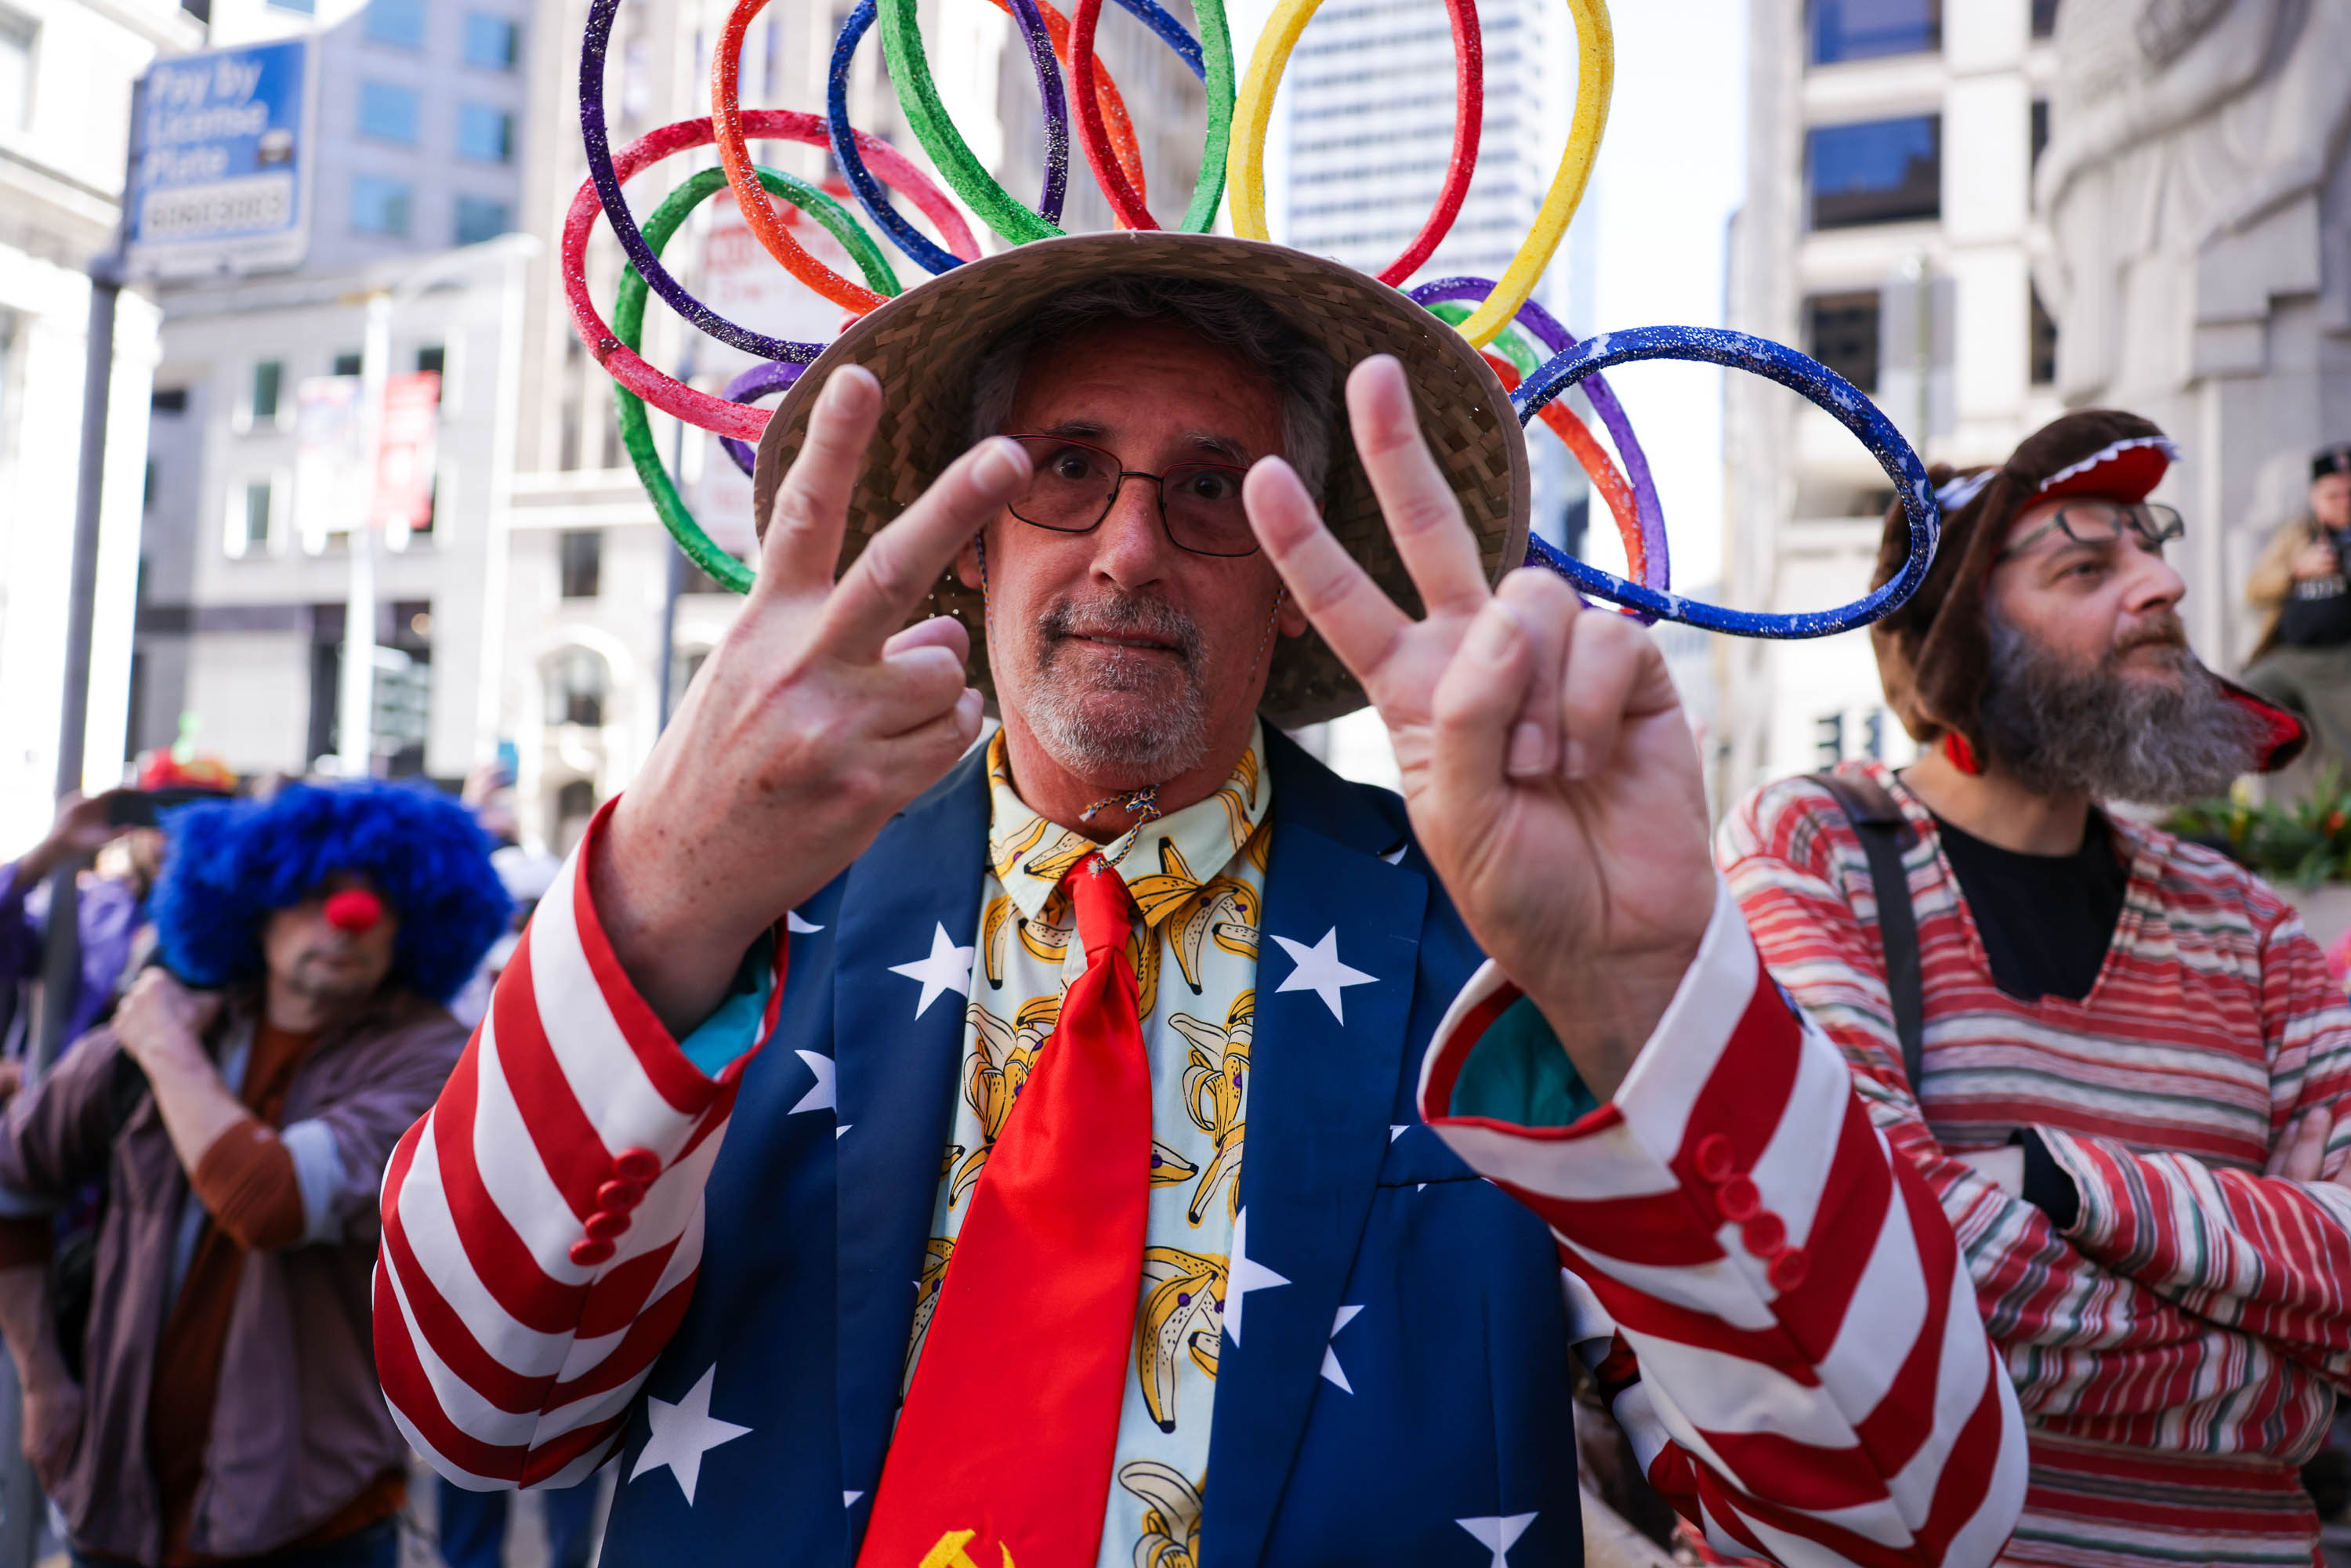 A man in a colorful hat and star-spangled jacket gesturing a peace sign, with a clown in the background.